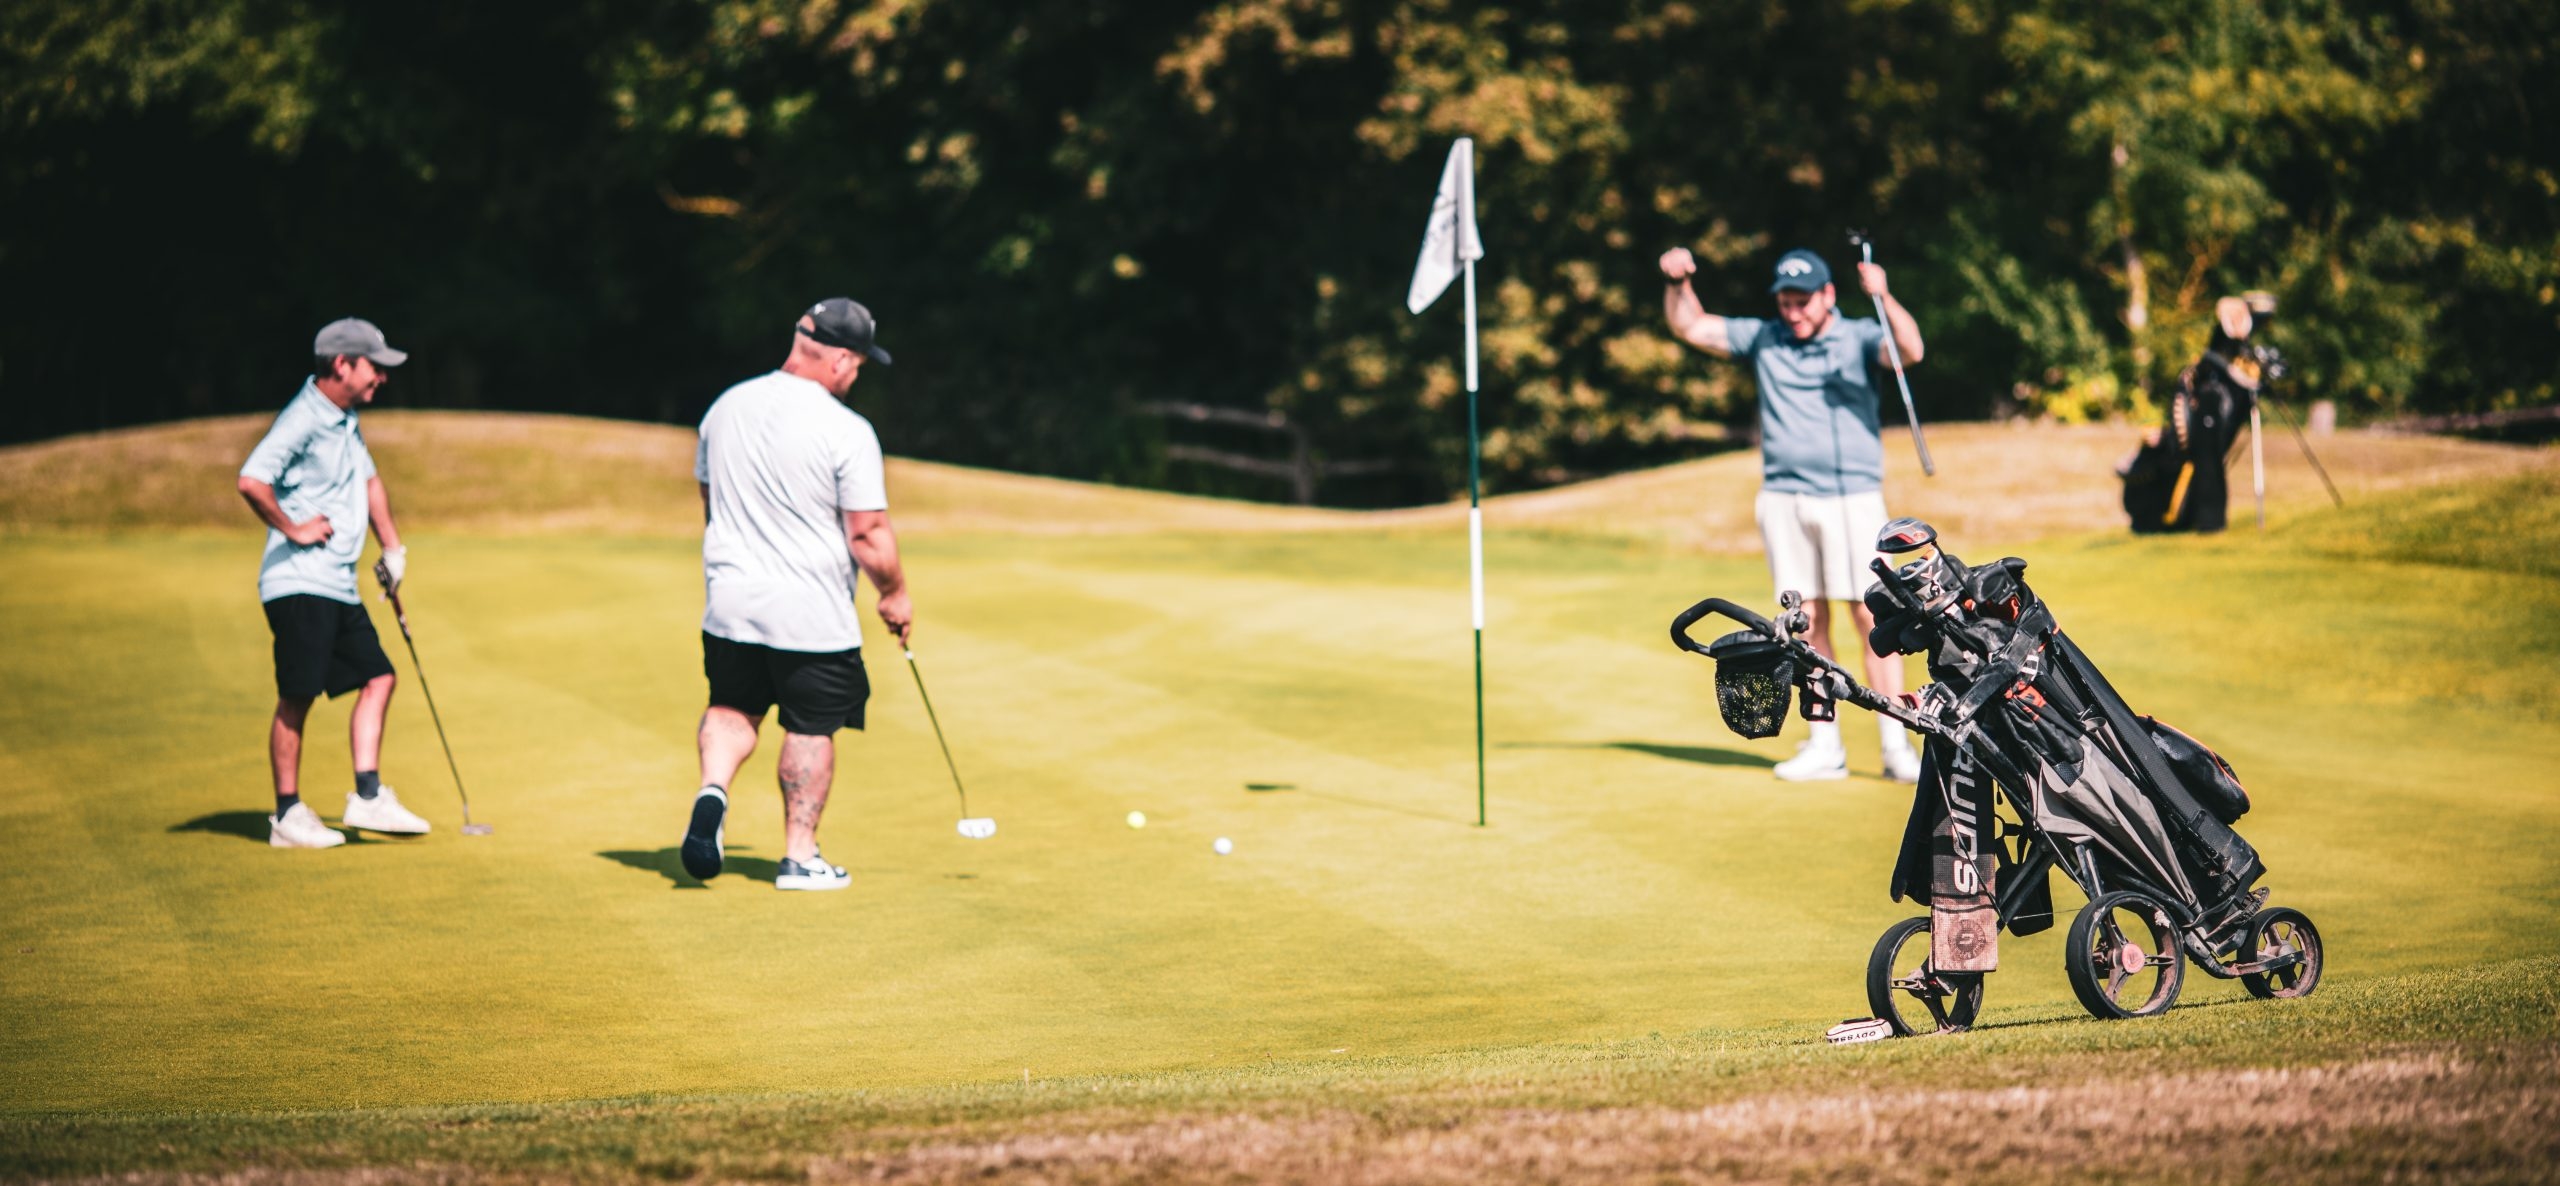 Golfer celebrating successful putt with companions watching on at Toot Hill golf course